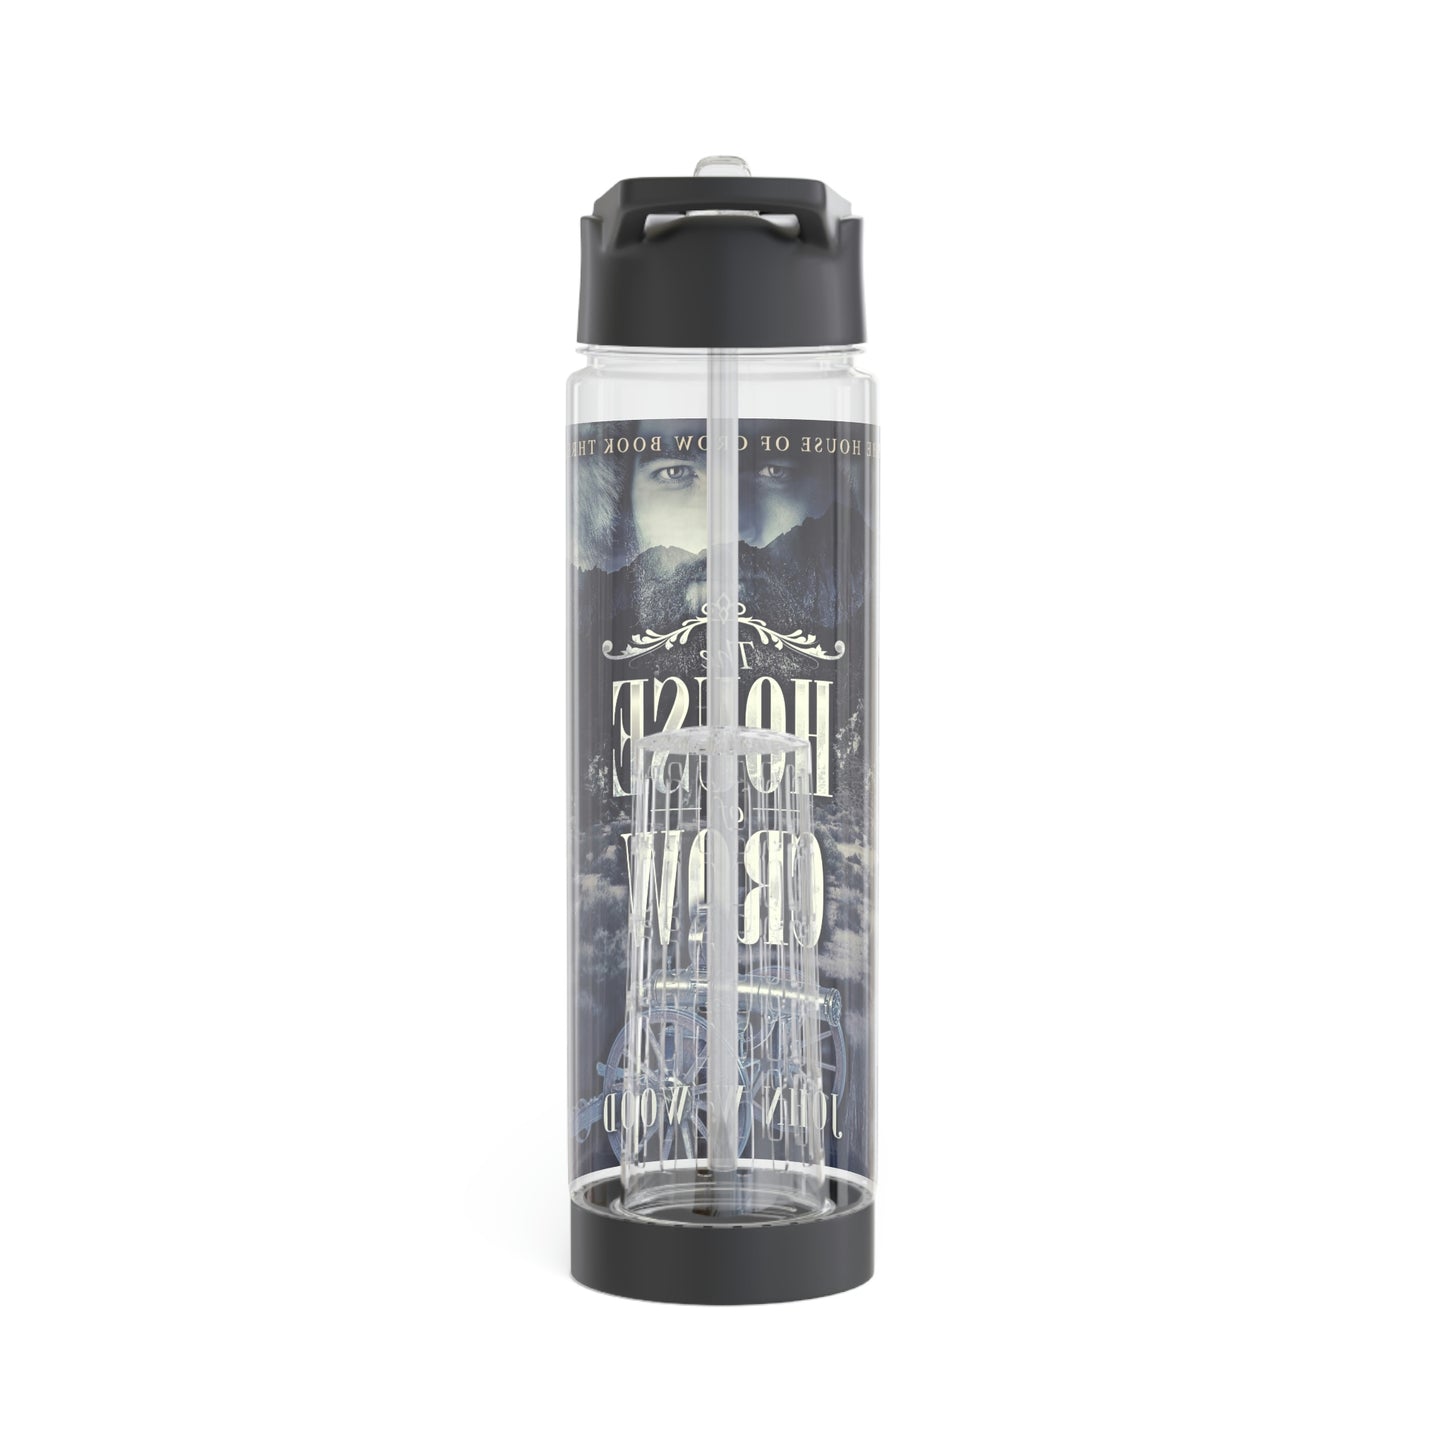 The House of Crow - Infuser Water Bottle